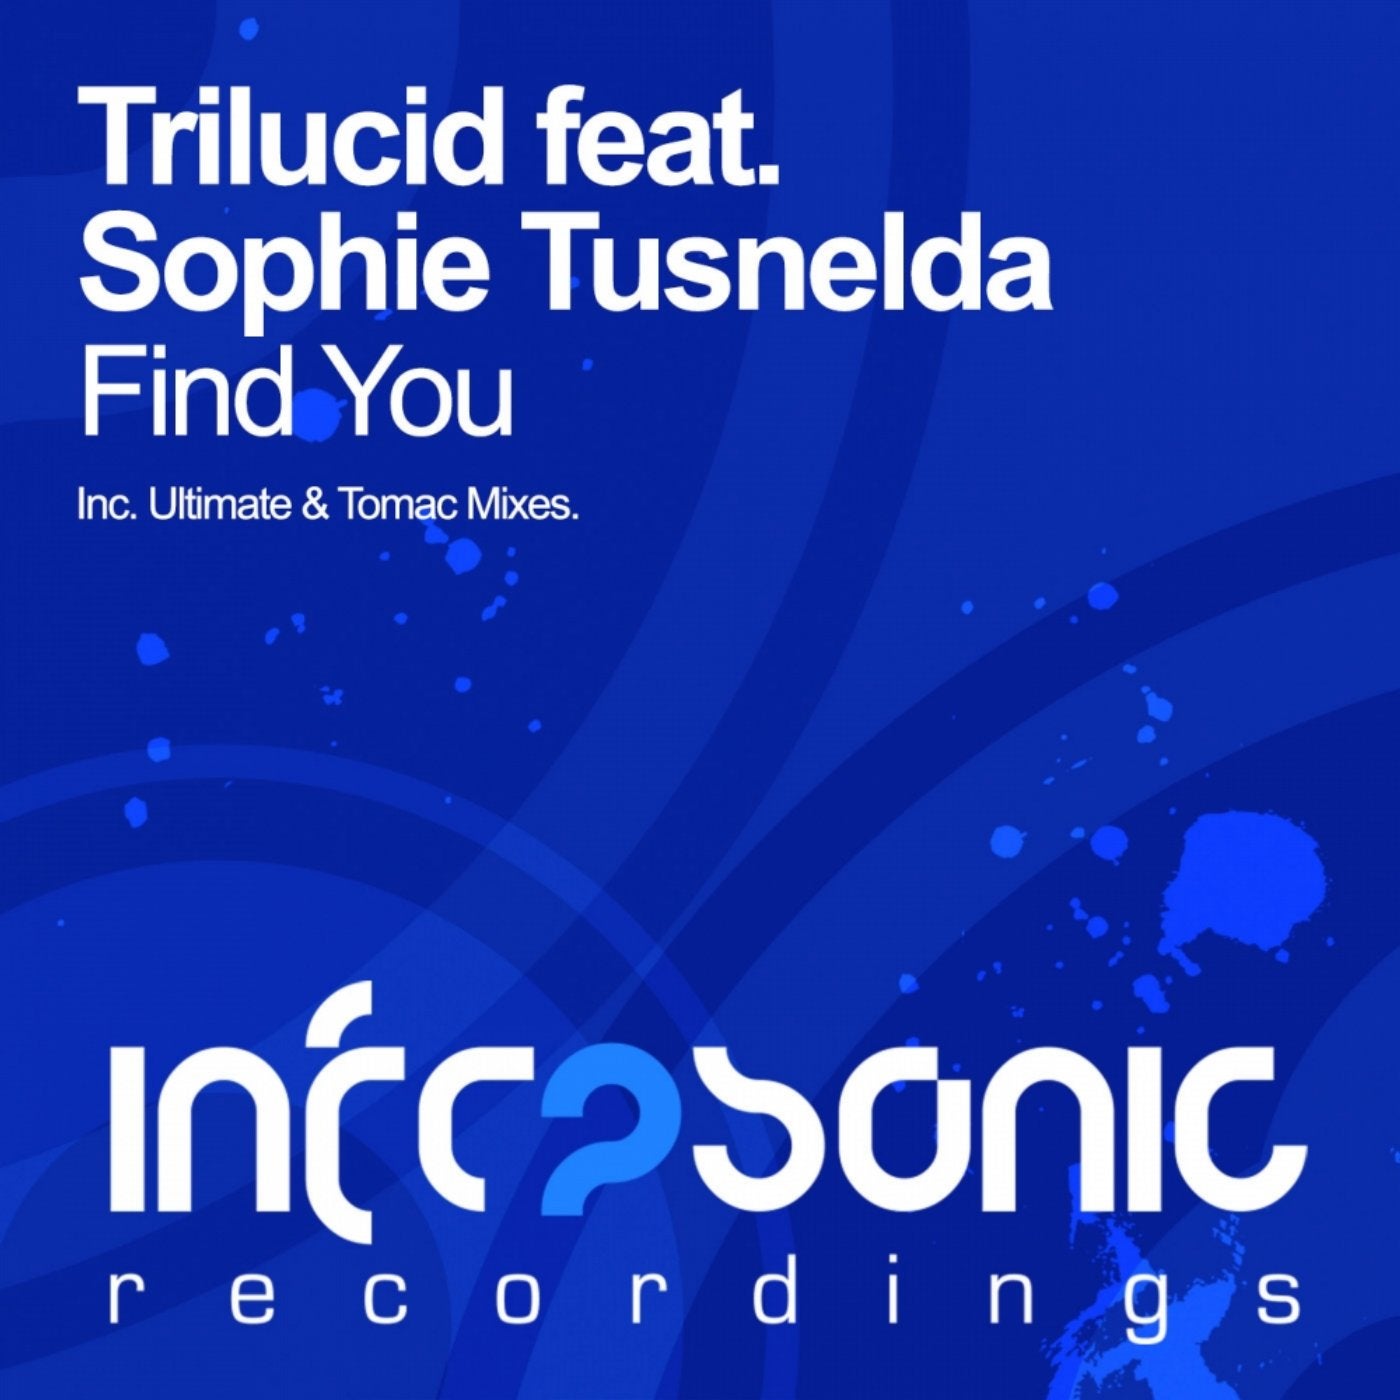 Find You (Remixed)